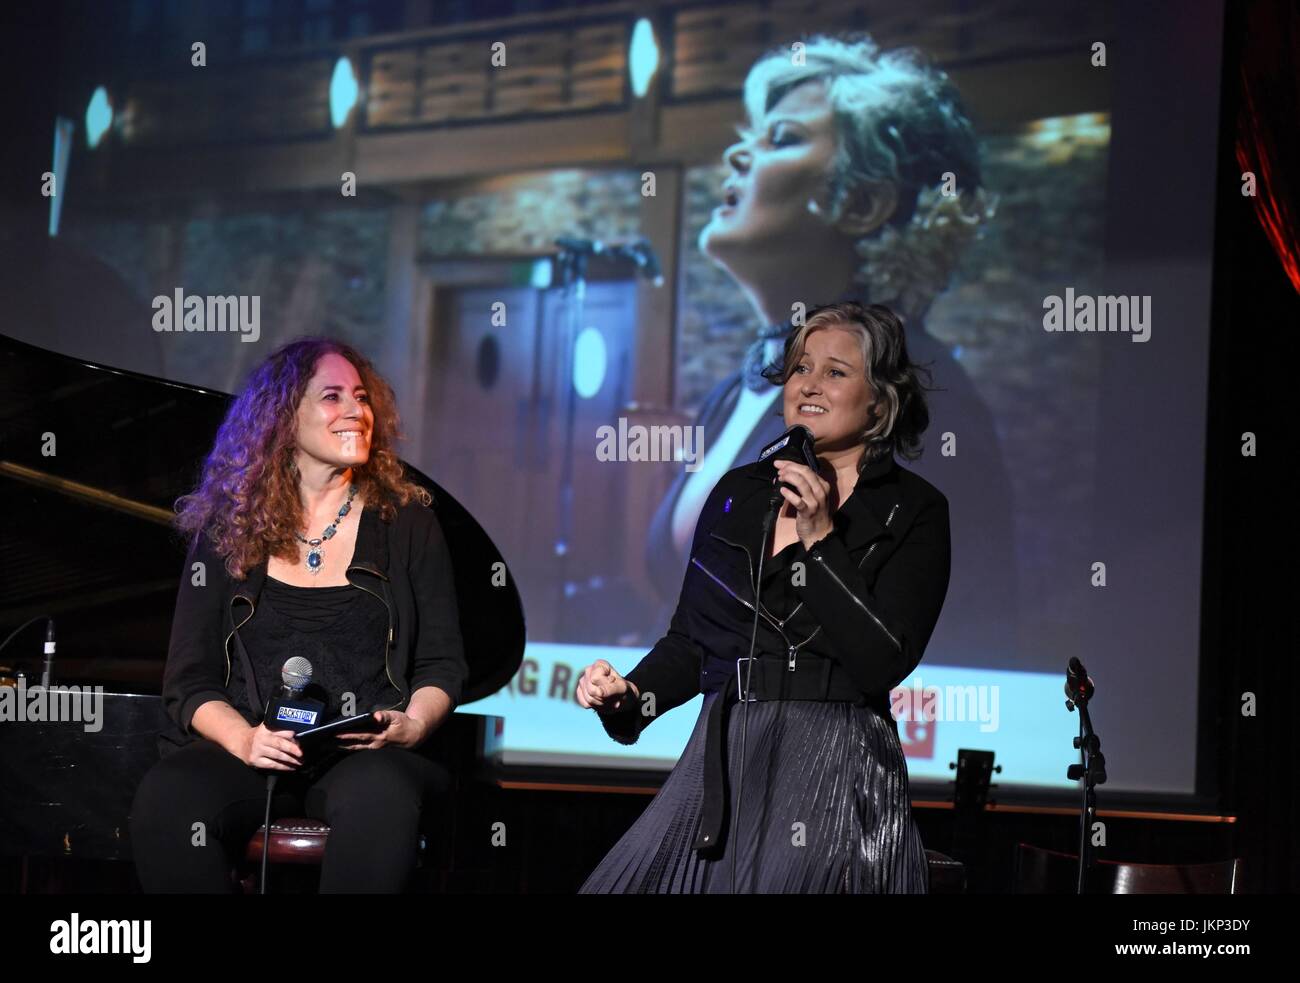 New York, NY, USA. 24th July, 2017. Laura B. Whitmore, Paula Cole in attendance for BackStory Events and Parade Magazine Present: An Intimate Evening of Conversation and Music with Paula Cole, The Cutting Room, New York, NY July 24, 2017. Credit: Derek Storm/Everett Collection/Alamy Live News Stock Photo